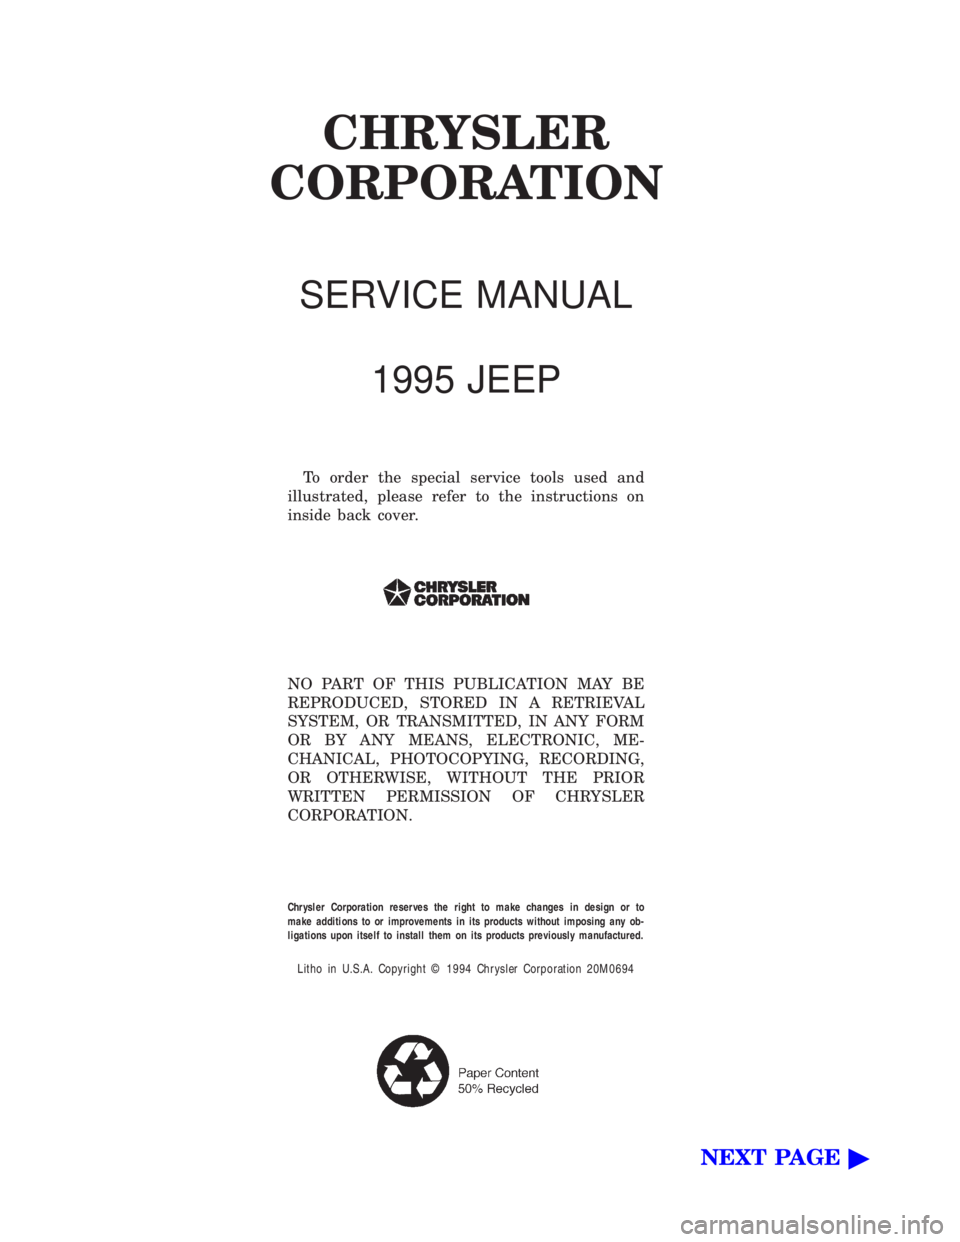 JEEP WRANGLER 1995  Owners Manual NO PART OF THIS PUBLICATION MAY BE
REPRODUCED, STORED IN A RETRIEVAL
SYSTEM, OR TRANSMITTED, IN ANY FORM
OR BY ANY MEANS, ELECTRONIC, ME-
CHANICAL, PHOTOCOPYING, RECORDING,
OR OTHERWISE, WITHOUT THE P